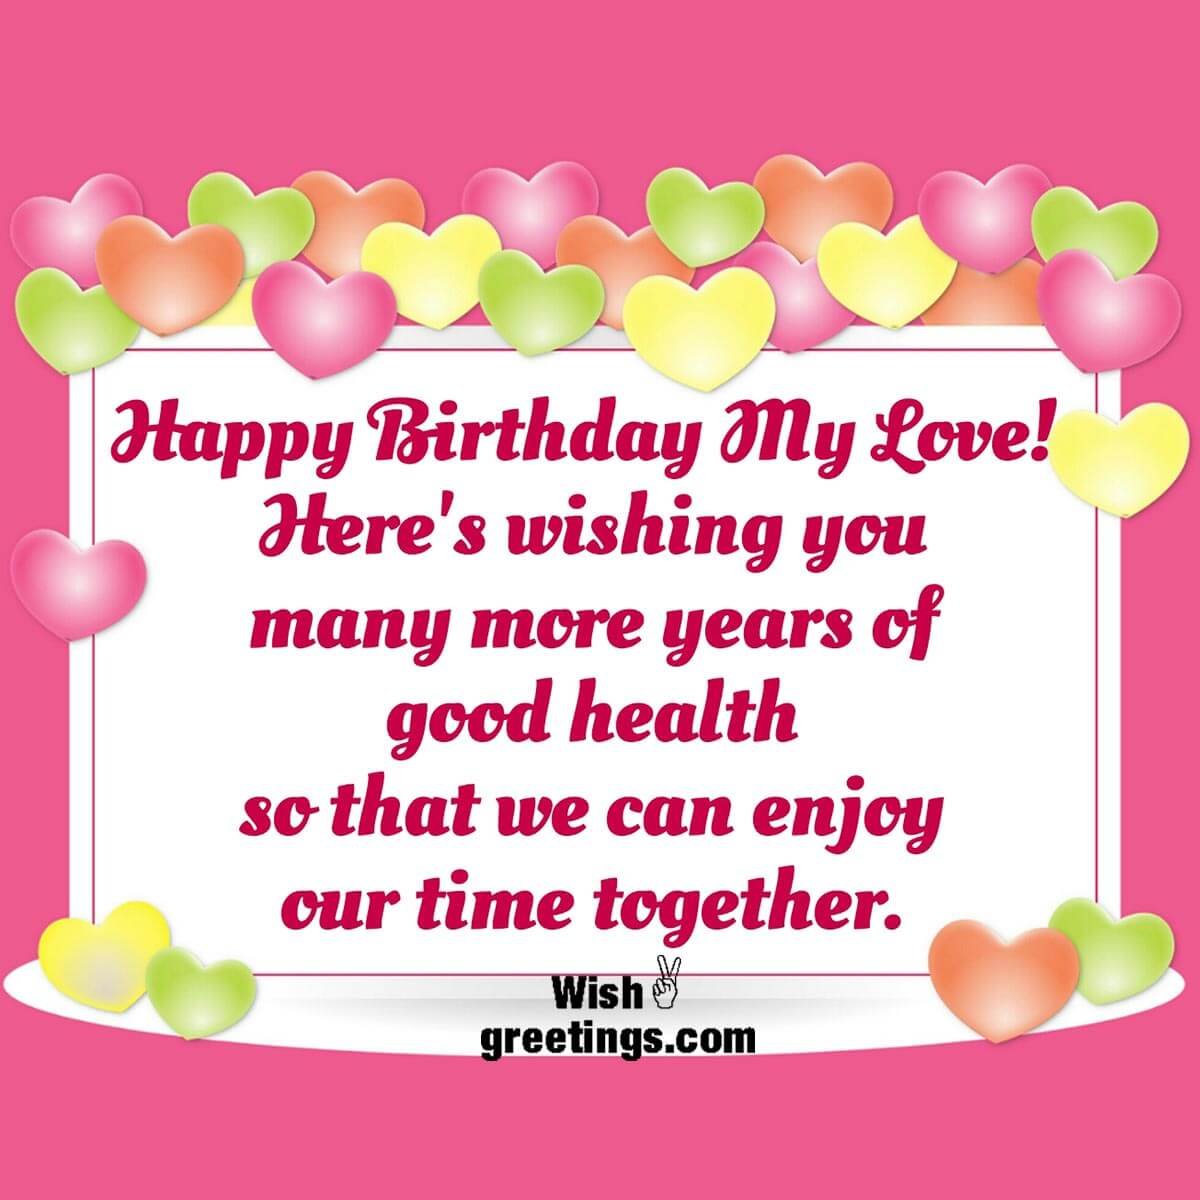 Happy Birthday Wishes Images For Boy Friend - Wish Greetings